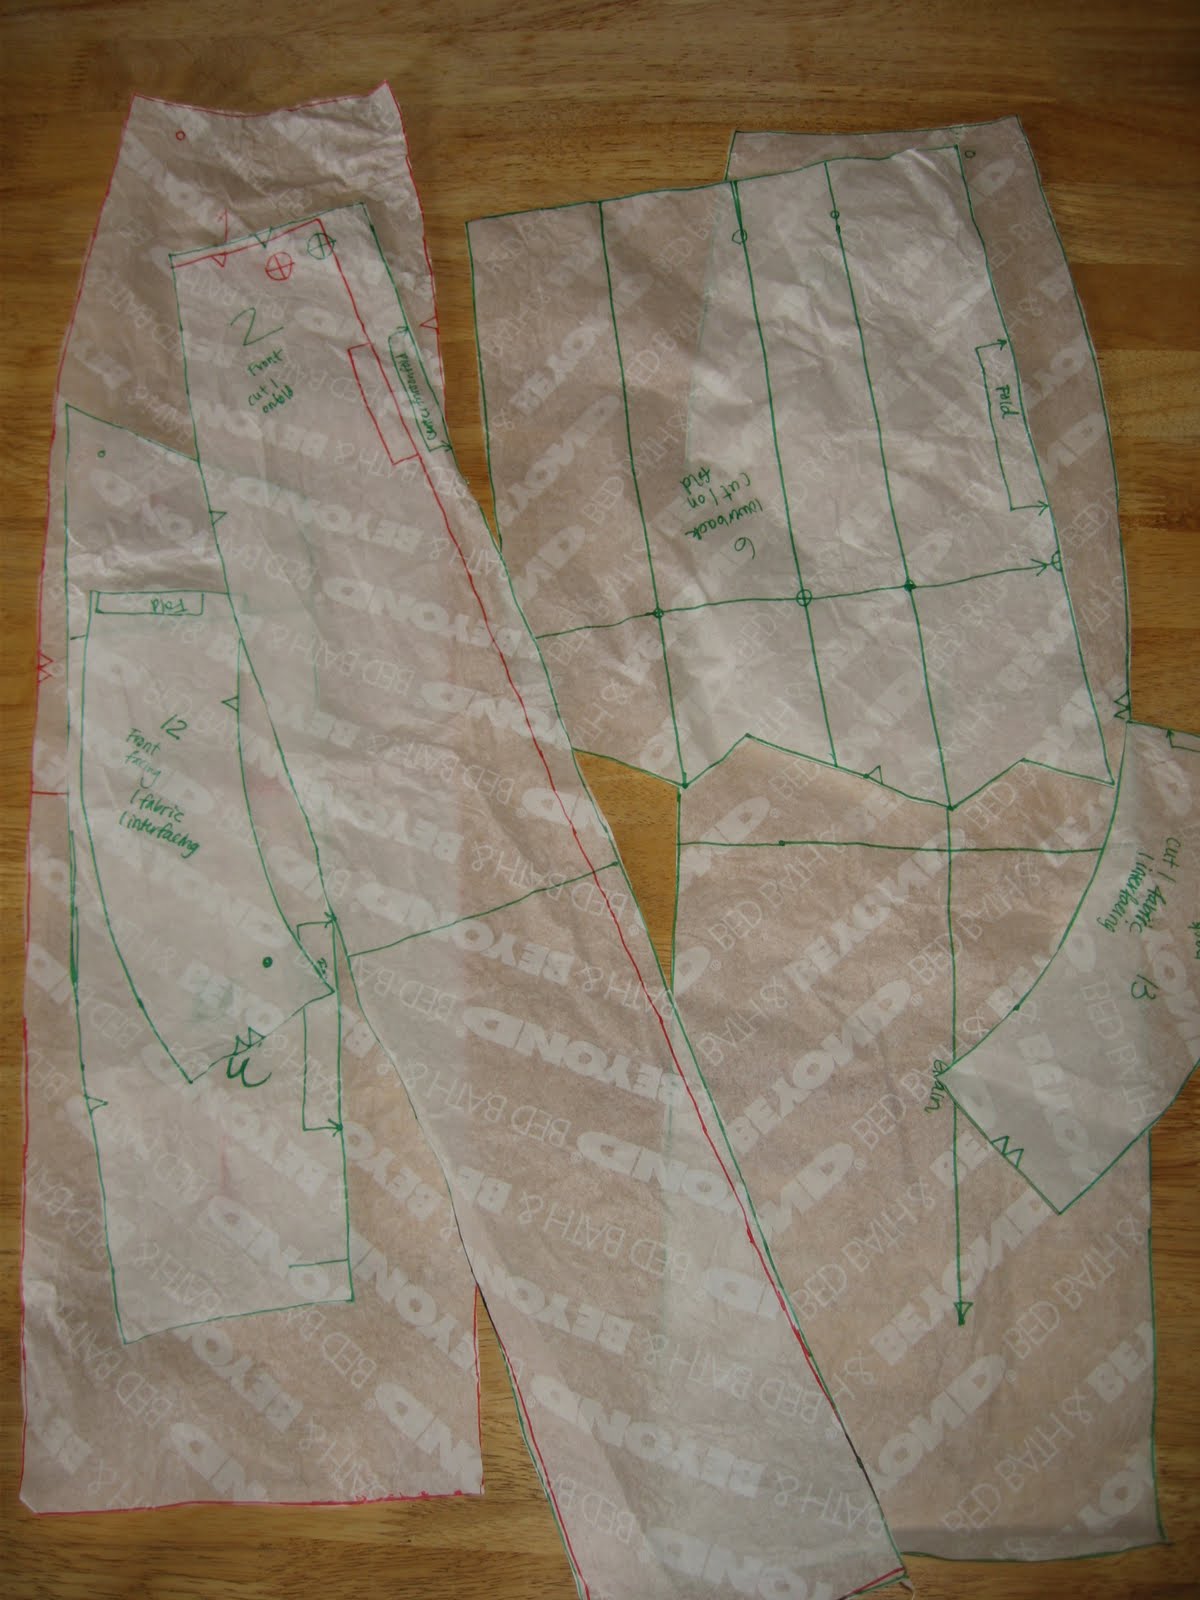 RisC Handmade: Tips for Re-using Sewing Patterns